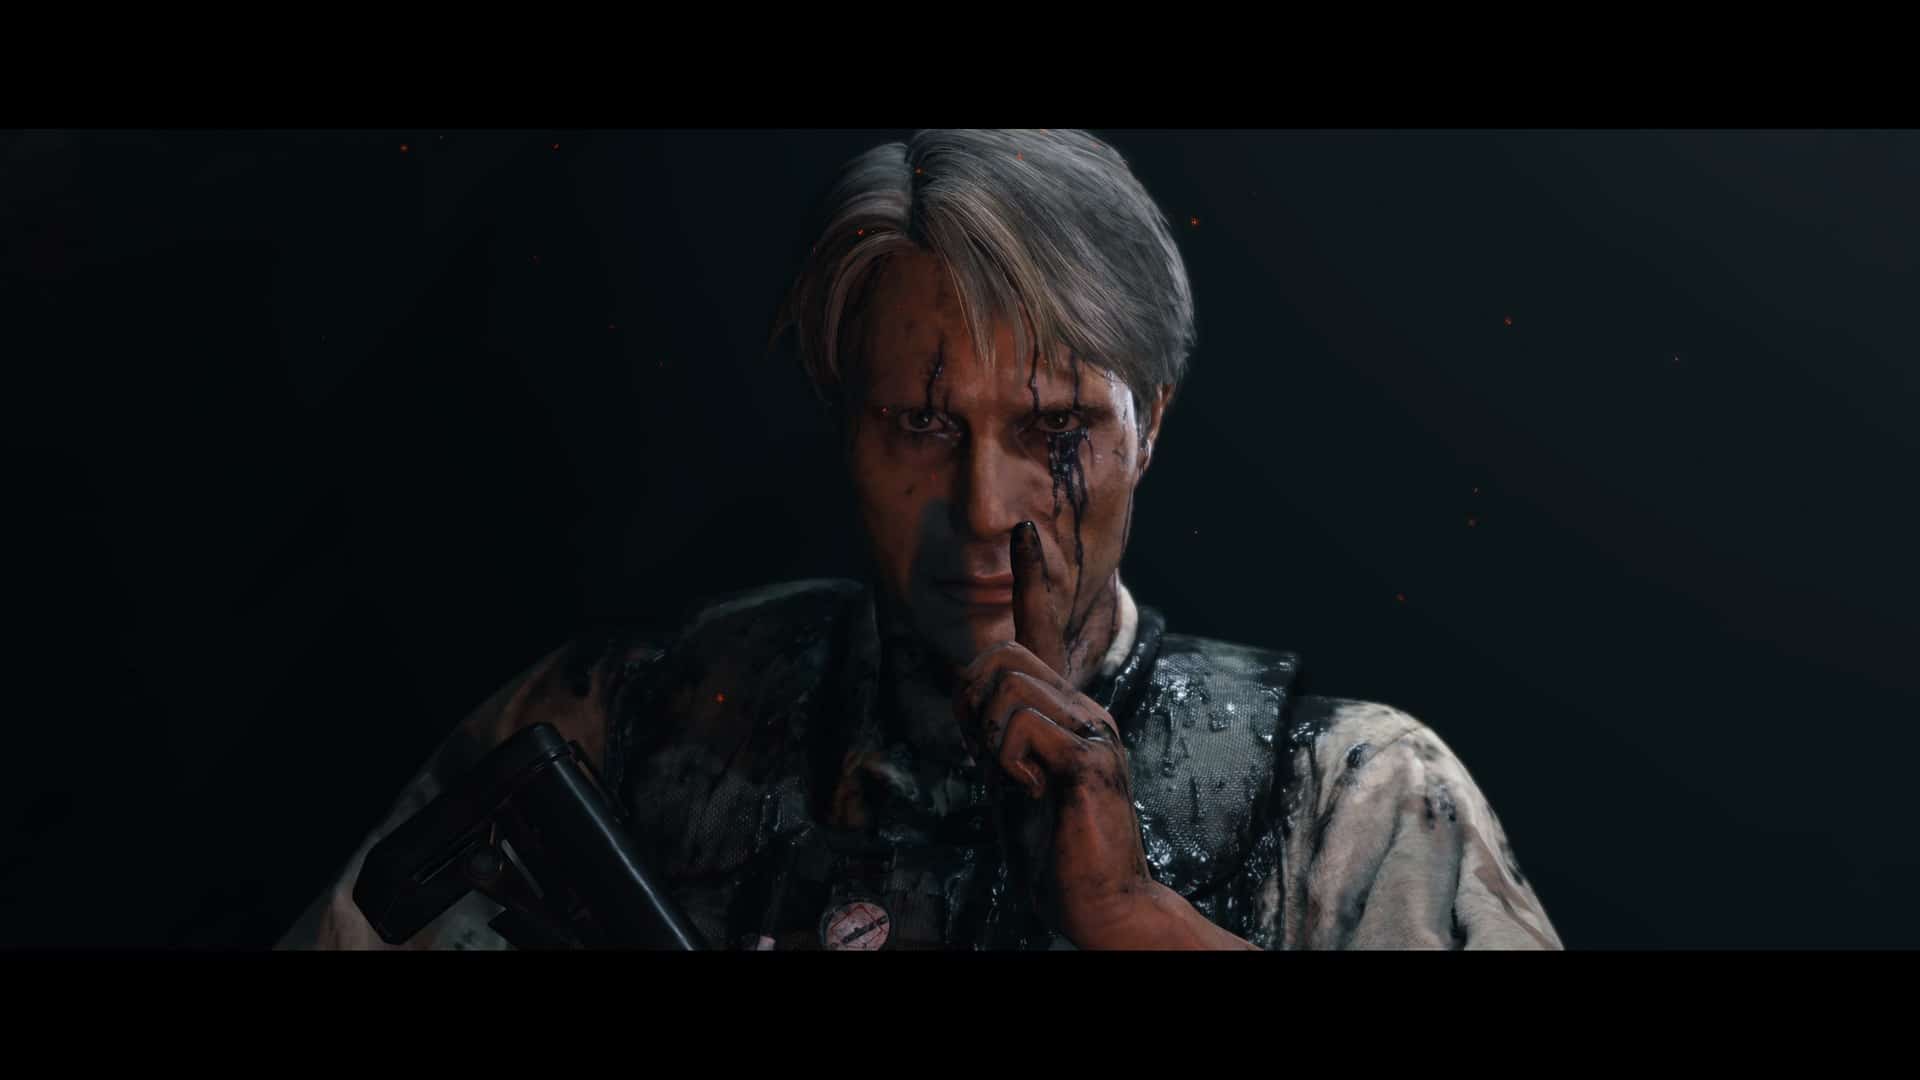 Death Stranding Director's Cut Delivers On PS5 September 24th - Hey Poor  Player